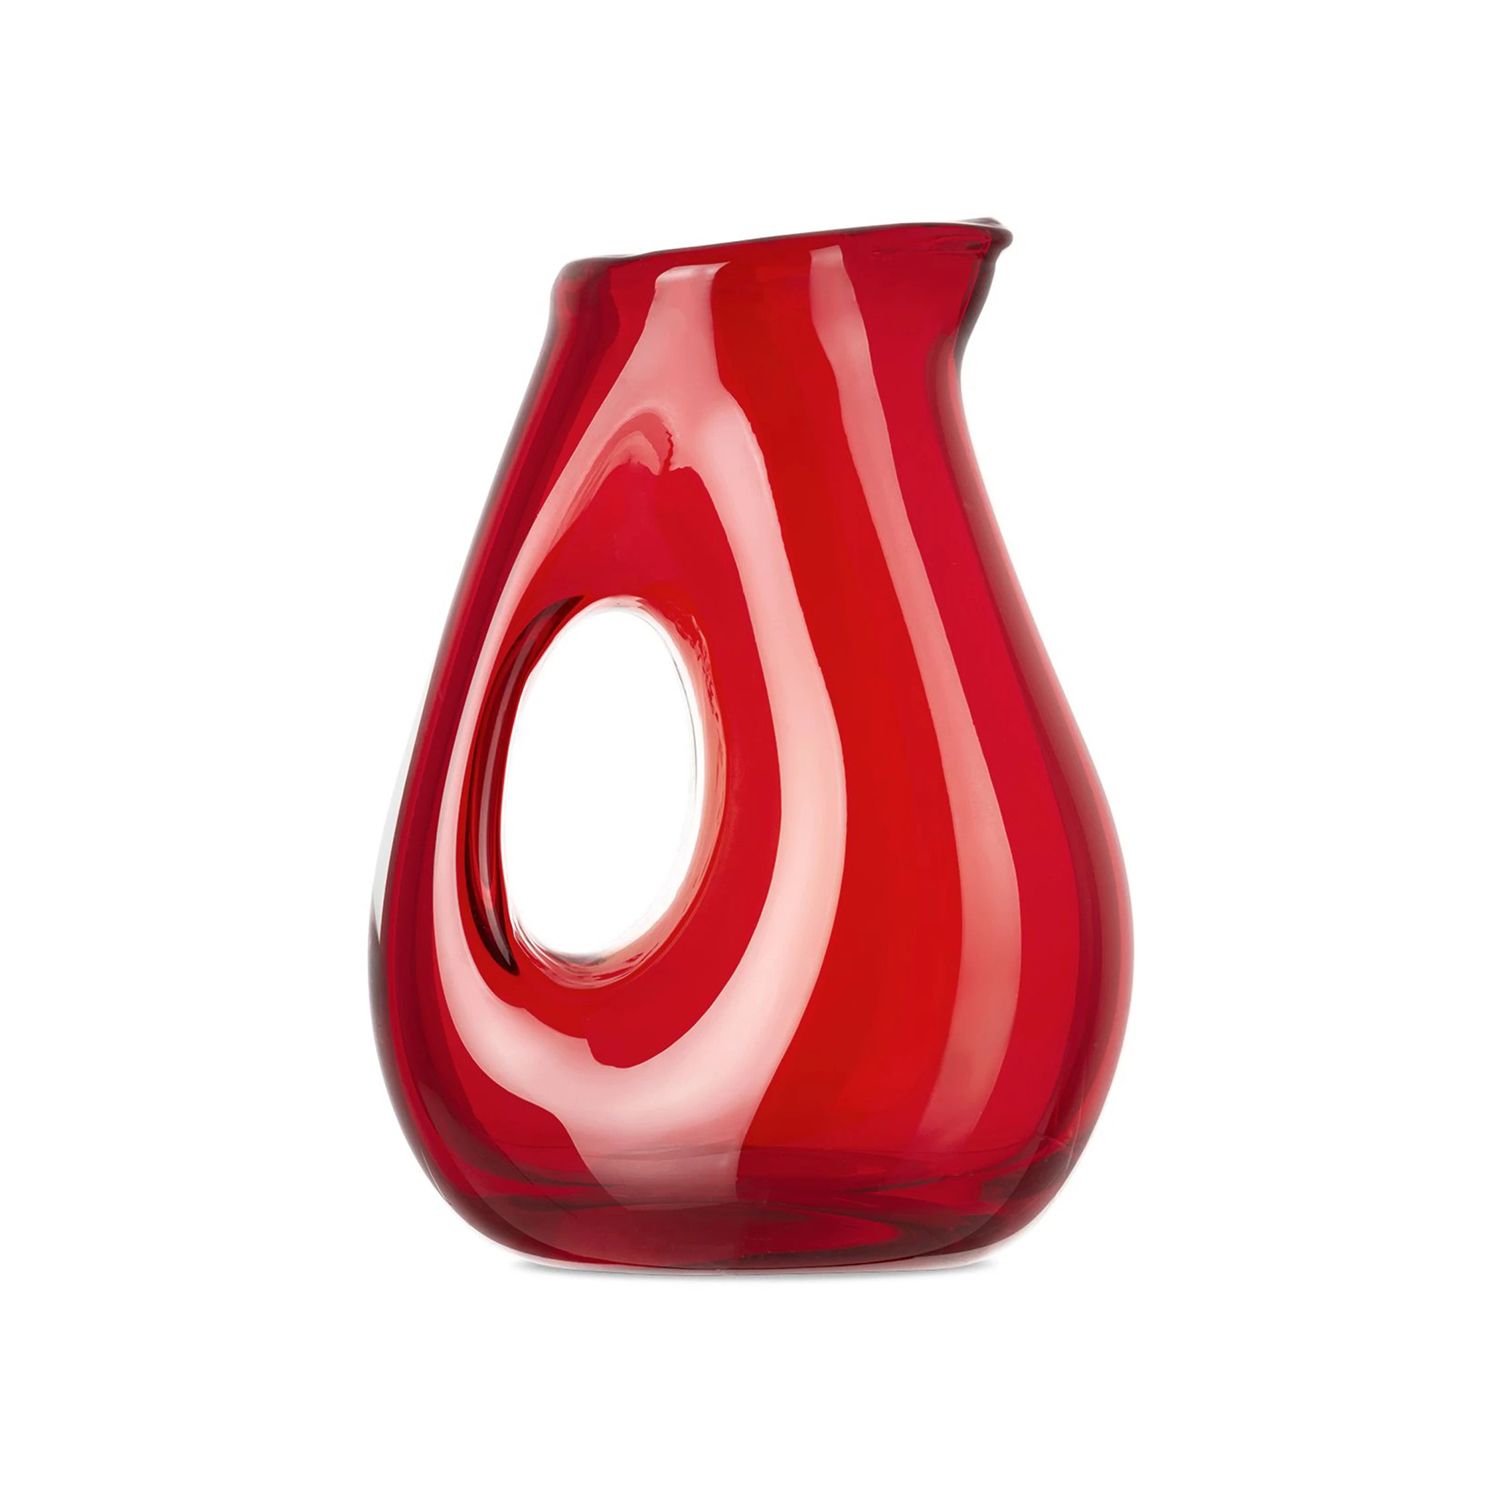 Polspotten Red Jug With Hole Pitcher